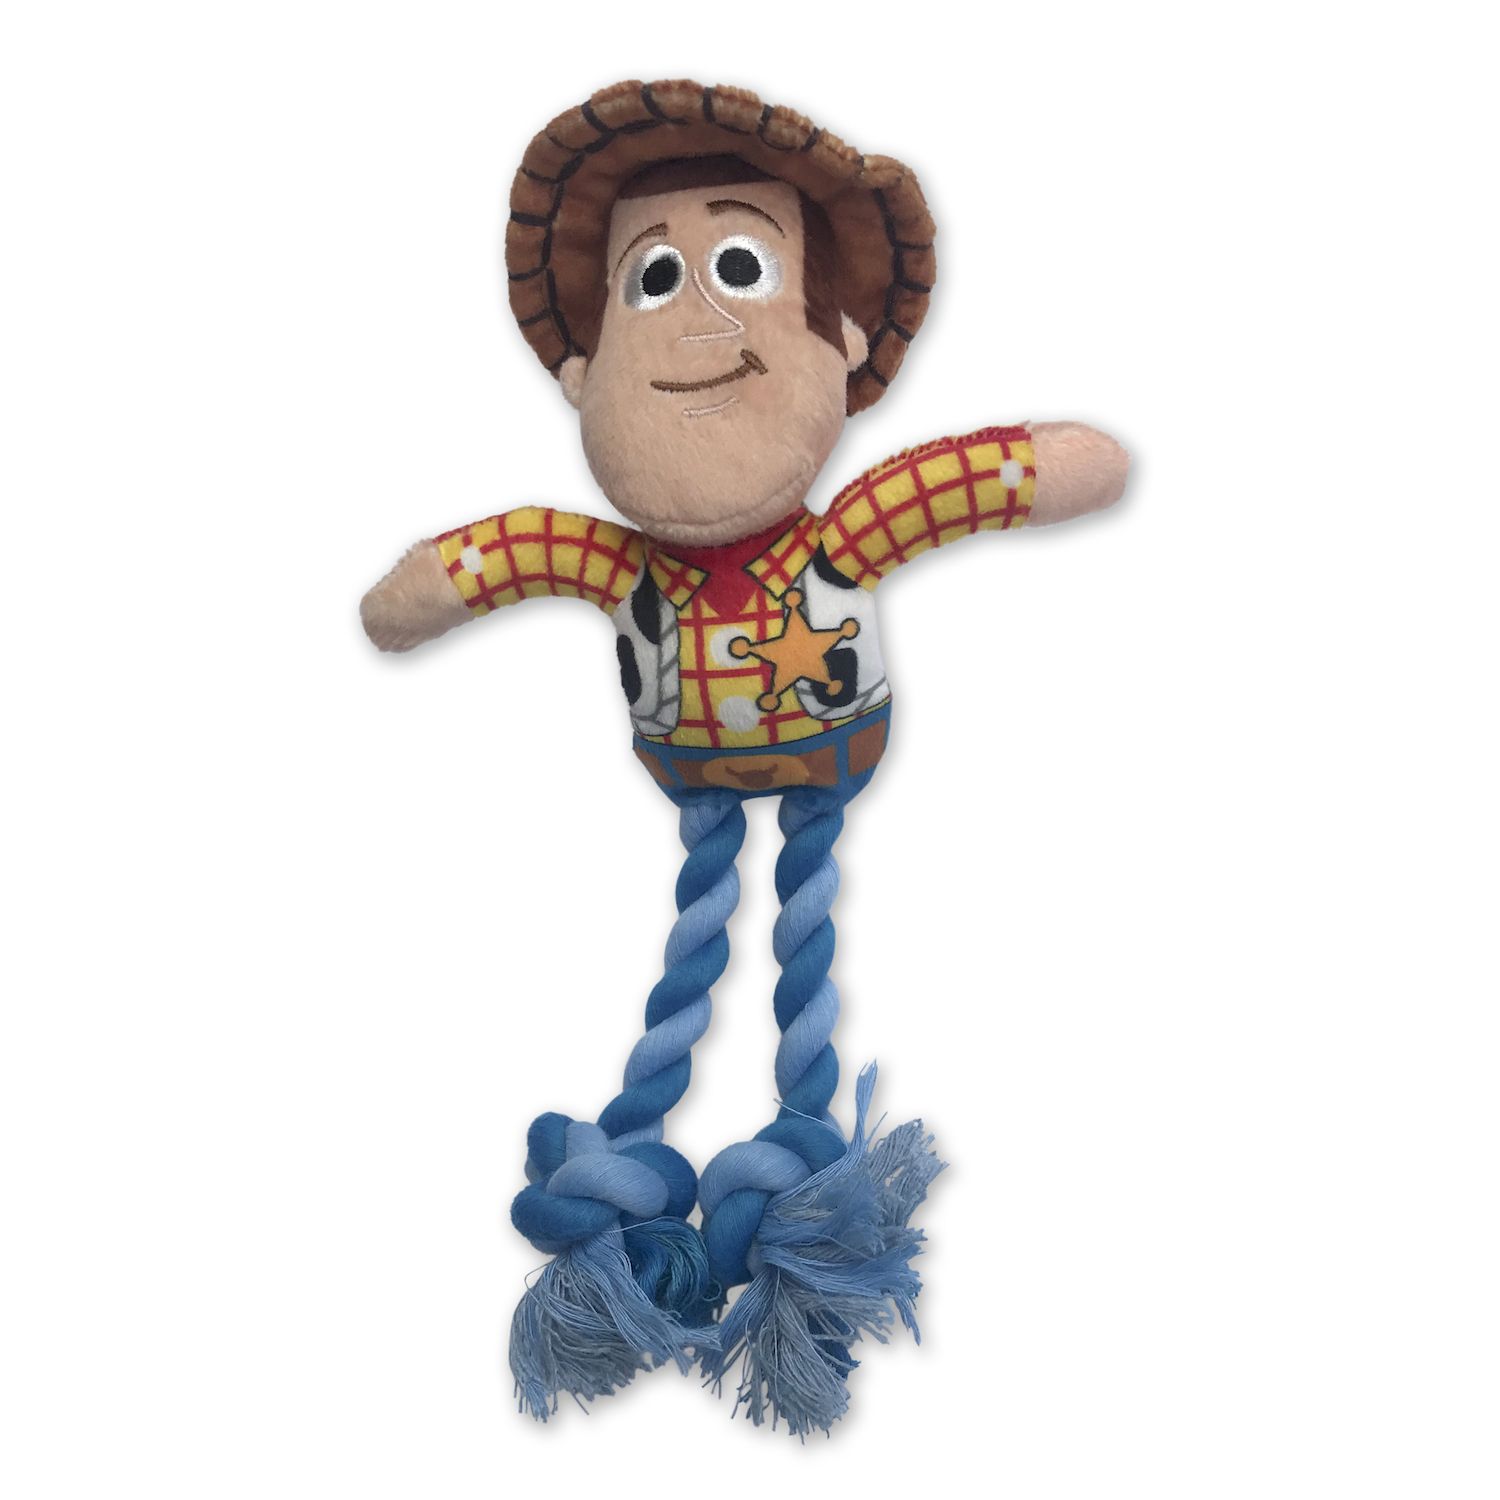 Image for Disney / Pixar Toy Story's Woody Plush Toy with Rope Legs at Kohl's.